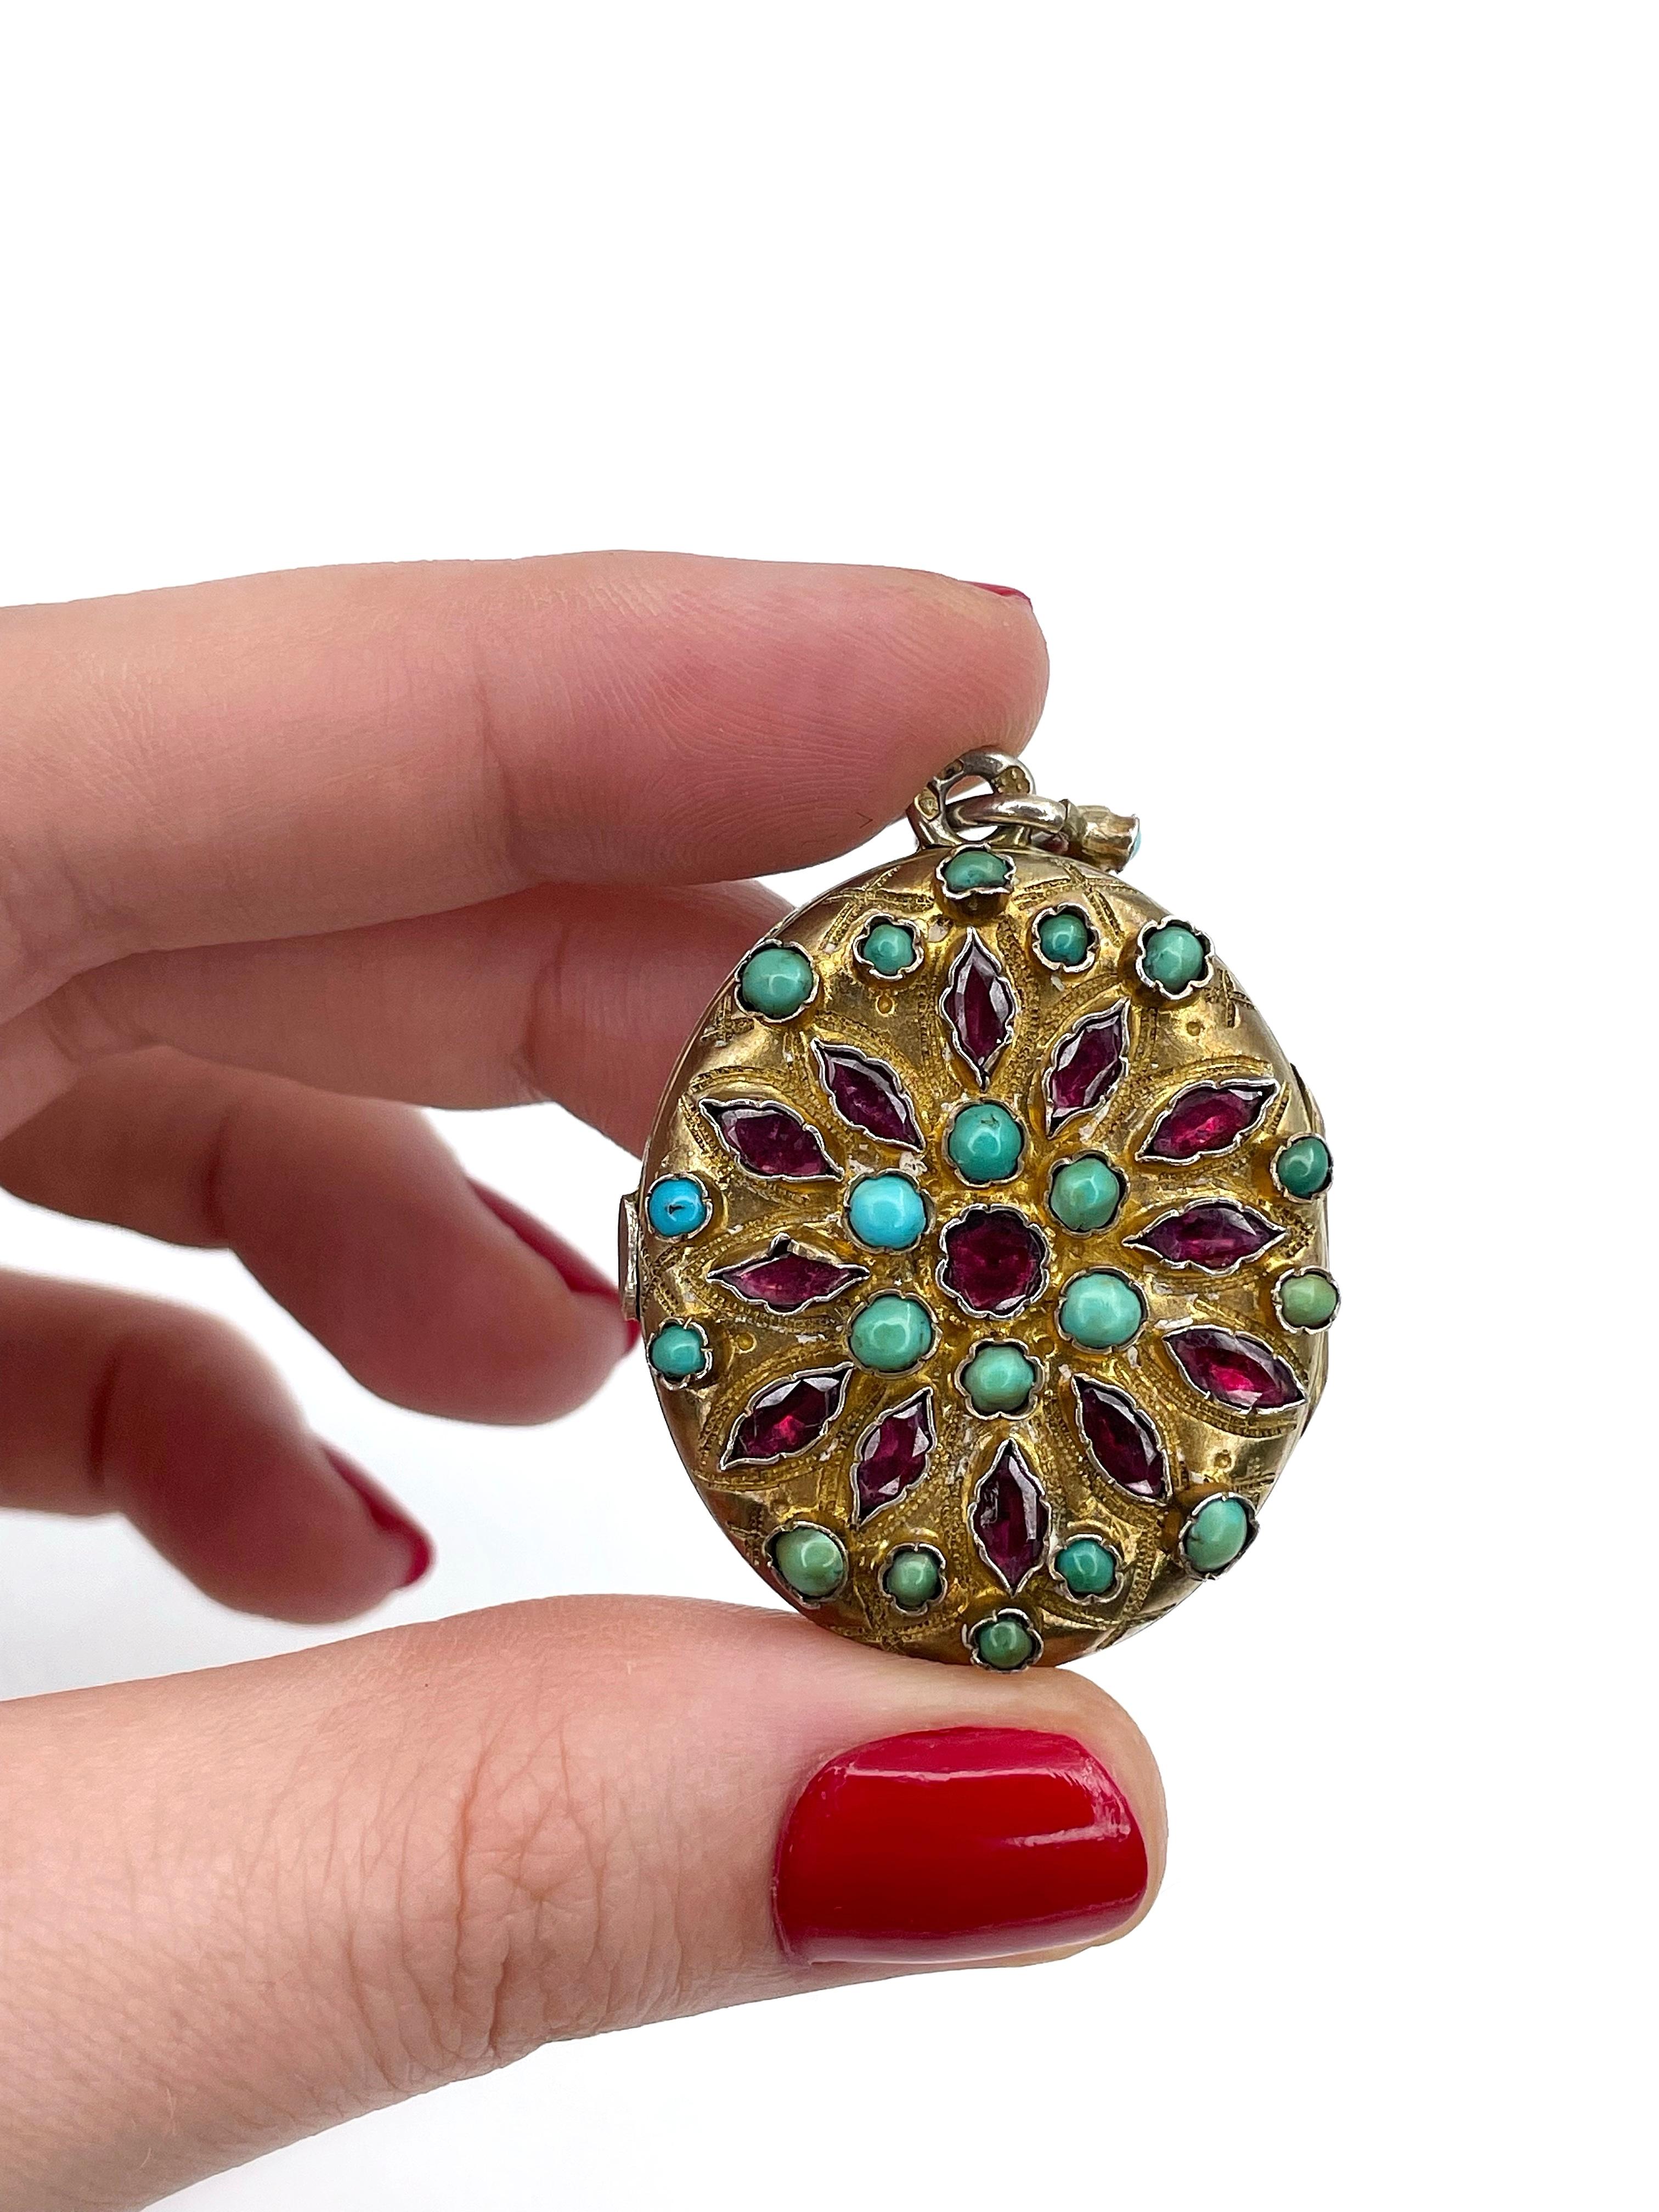 This is a stunning Austro-Hungarian locket pendant designed in Renaissance Revival style. It is crafted in silver and adorned with gold. The piece features beautiful garnets and turquoises. It has two spaces for pictures inside. 

Weight: